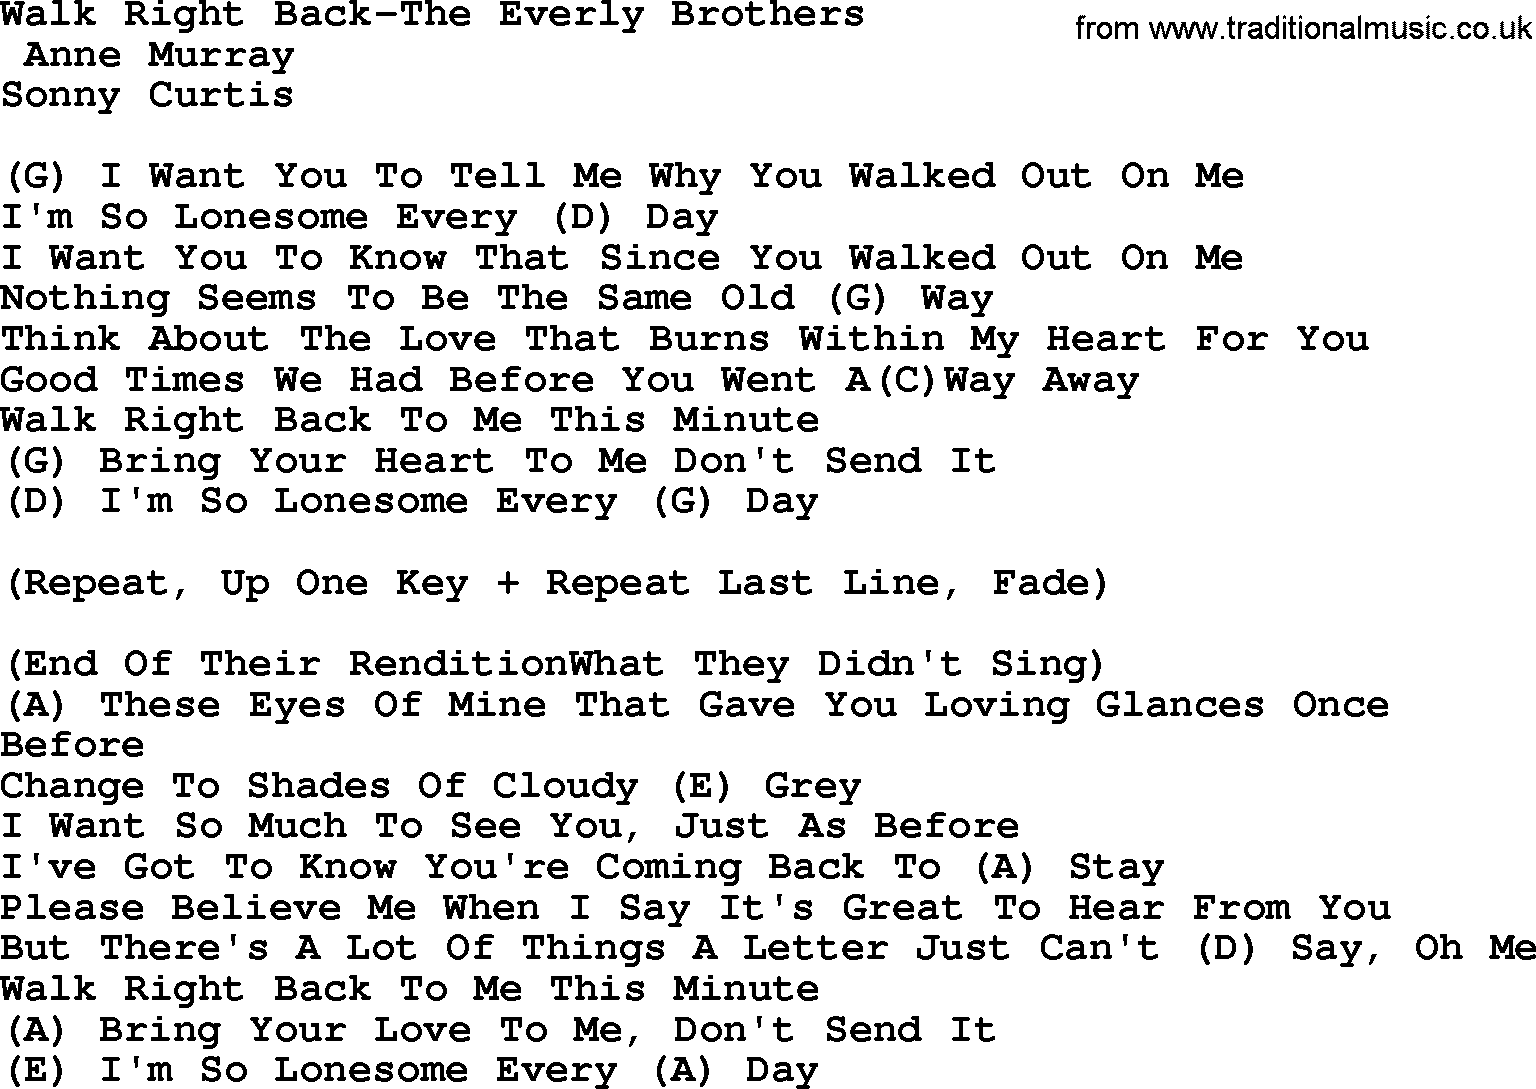 Country music song: Walk Right Back-The Everly Brothers lyrics and chords